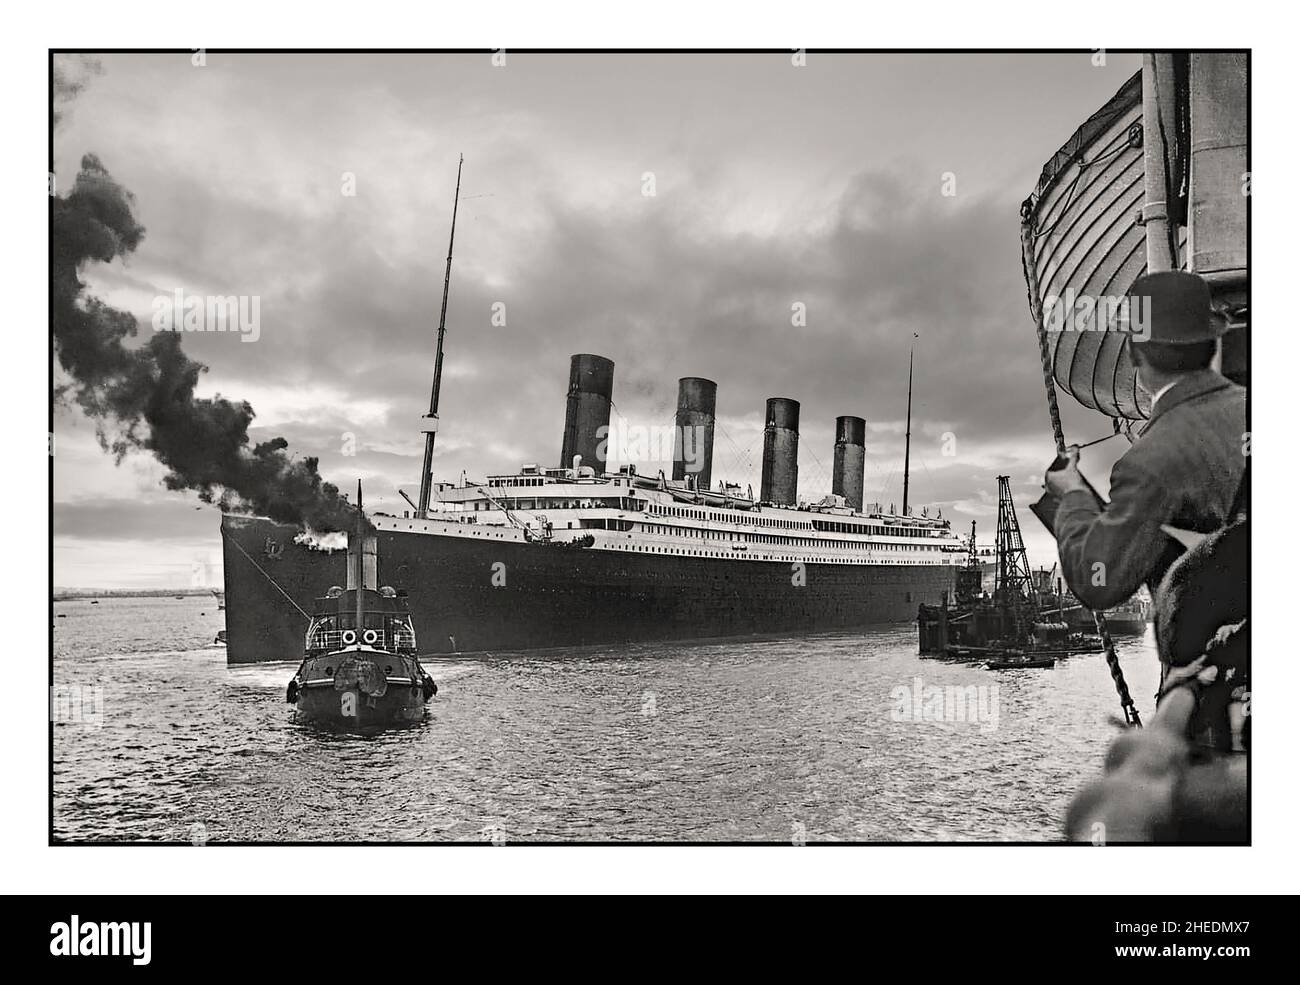 RMS Titanic 10th April 1912 maiden voyage with press photographer in foreground  departing, setting sail from Southampton UK on her fateful maiden sailing journey to New York where she tragically sank 5 days later on 15th April with huge loss of life after hitting an iceberg Stock Photo